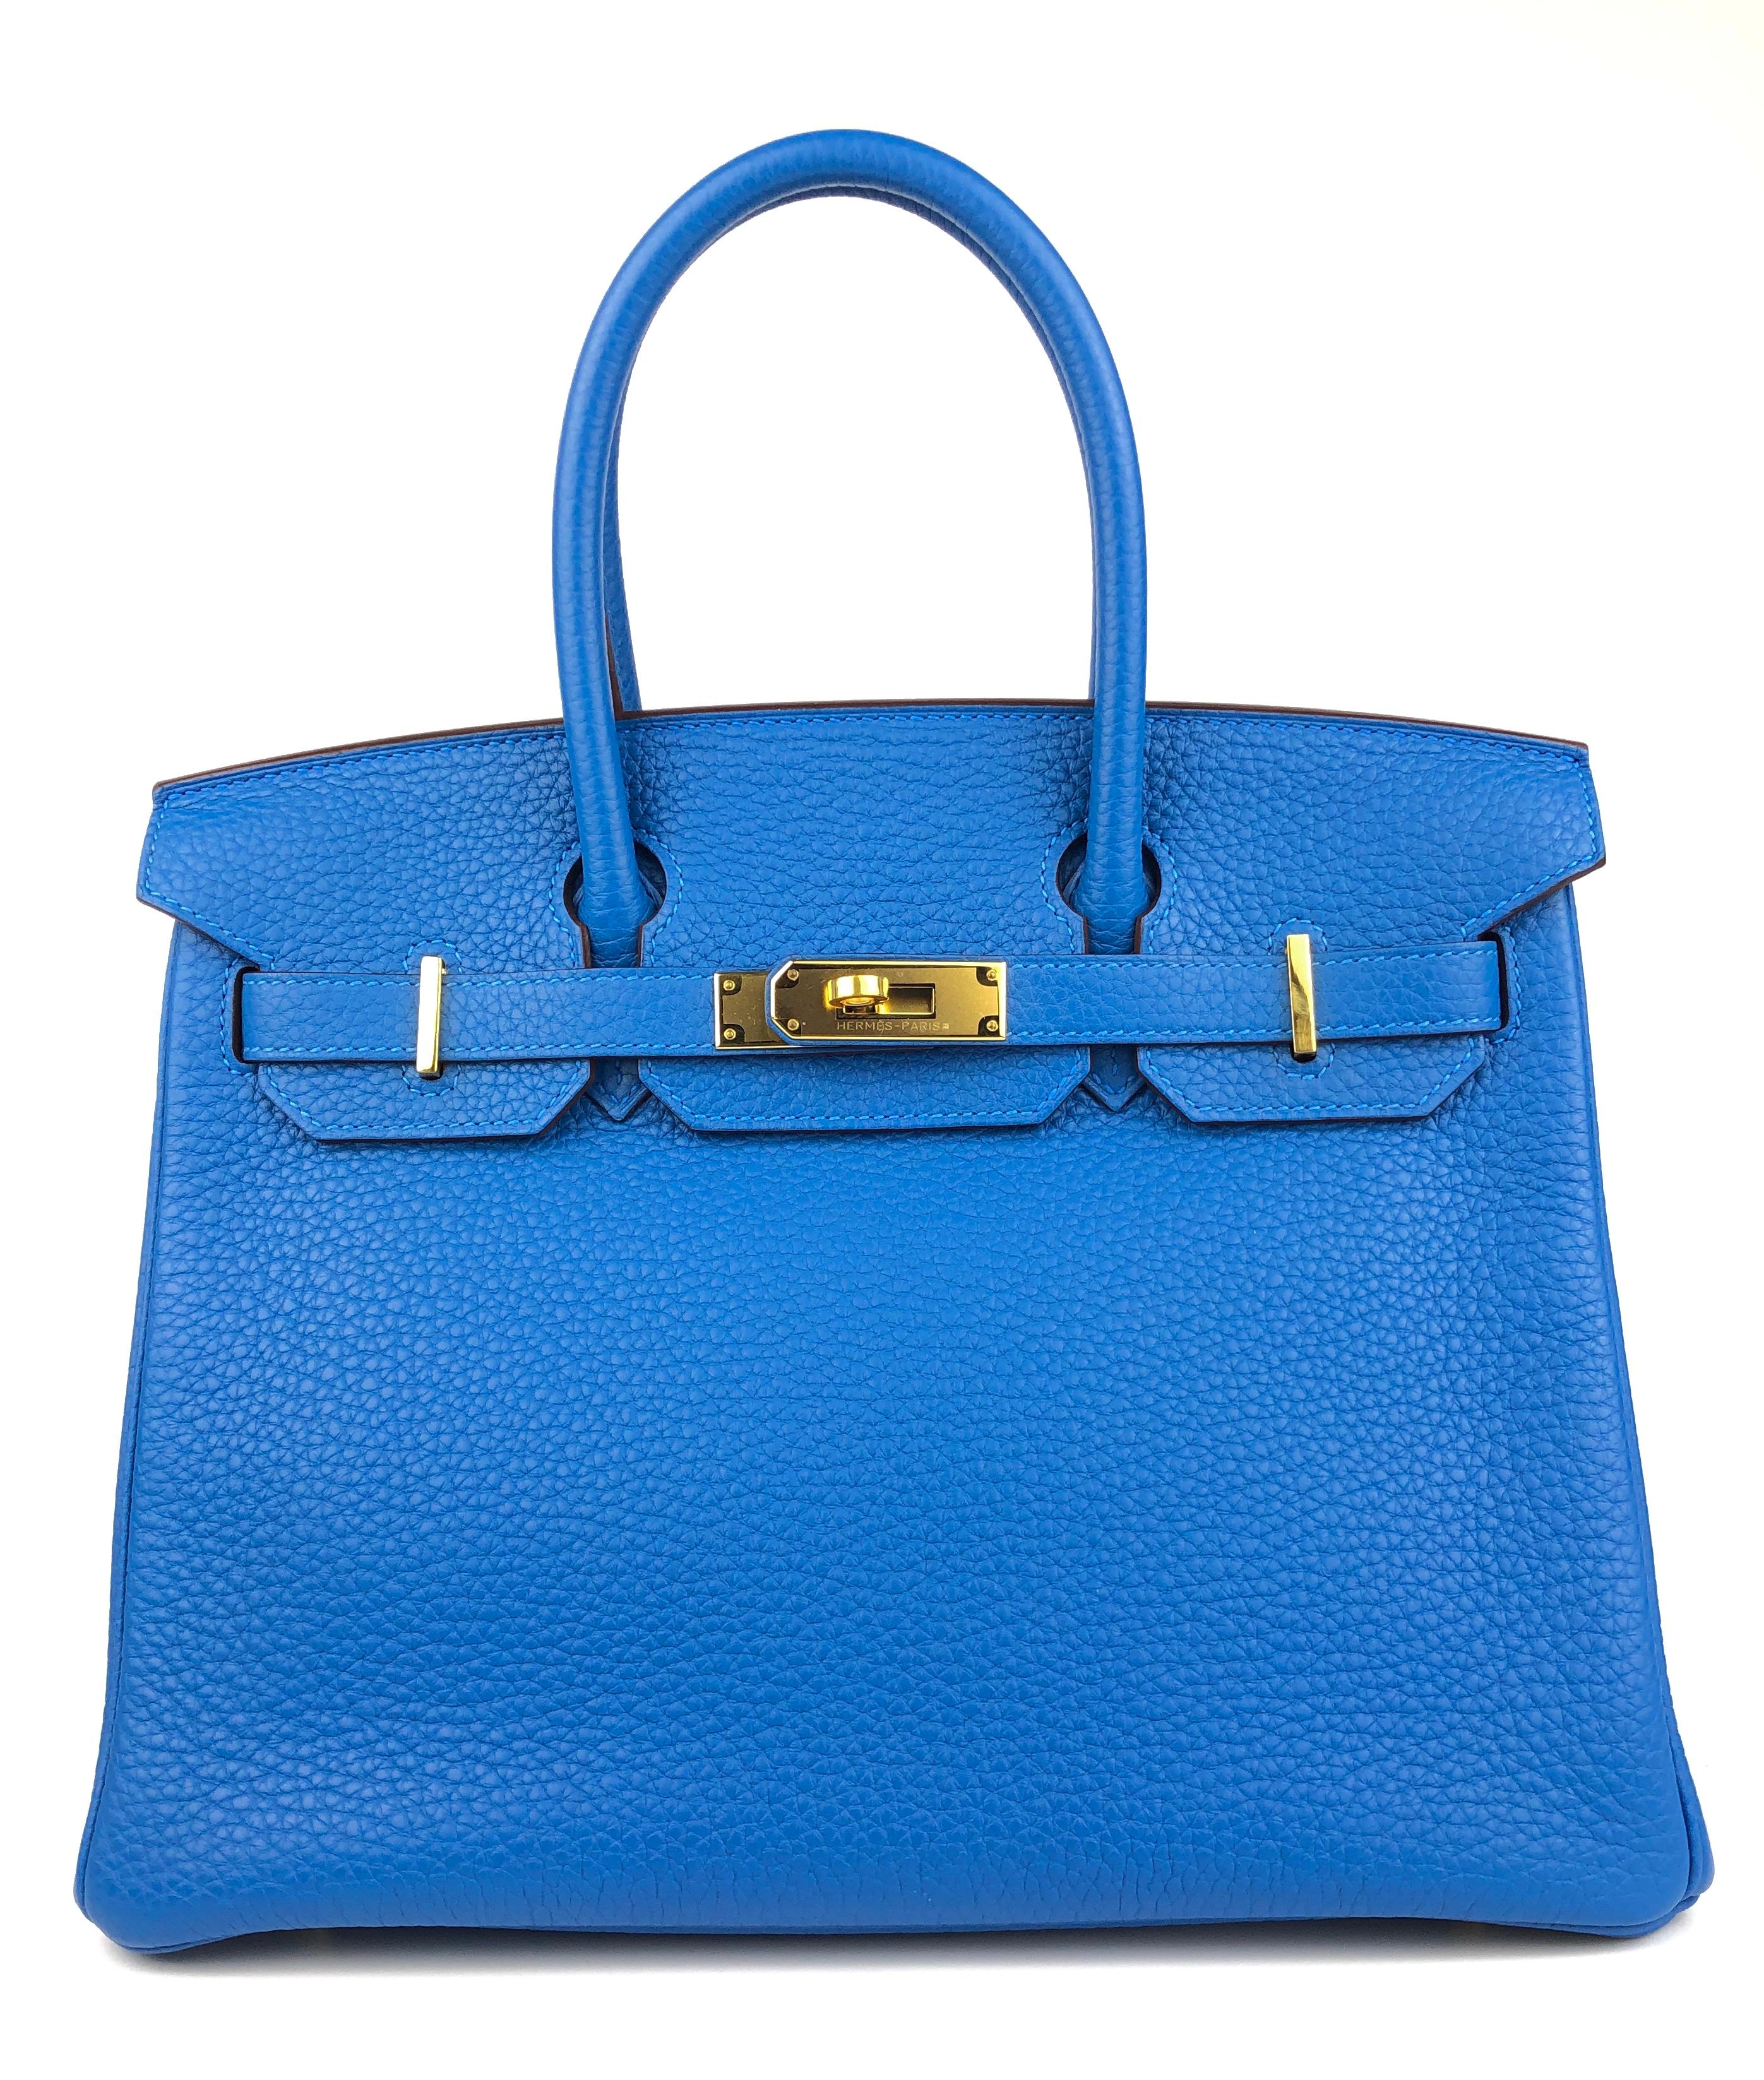 Stunning Hermes Birkin 30 Blue Hydra complimented by Gold Hardware. Pristine Condition with Plastic on Hardware. 2015 T Stamp. 

Shop with Confidence from Lux Addicts. Authenticity Guaranteed! 